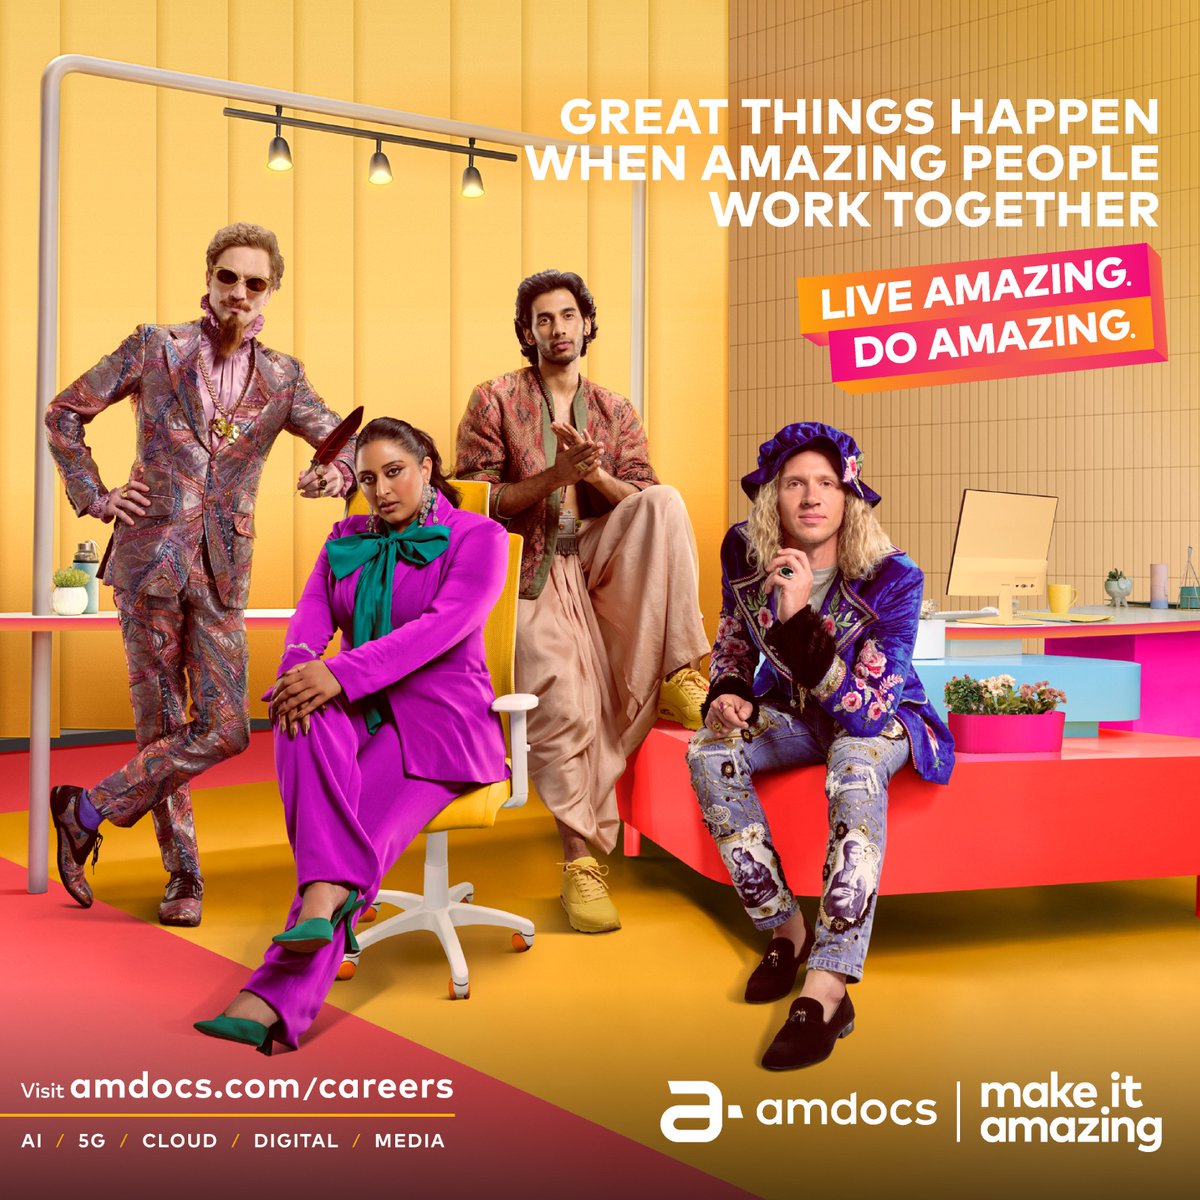 The spirit of #LiveAmazingDoAmazing is not just about a place, it's about people.

At Amdocs, our people are at the forefront of everything we do. We thrive together as a community and make waves together in the industry as a team.

#MakeItAmazing